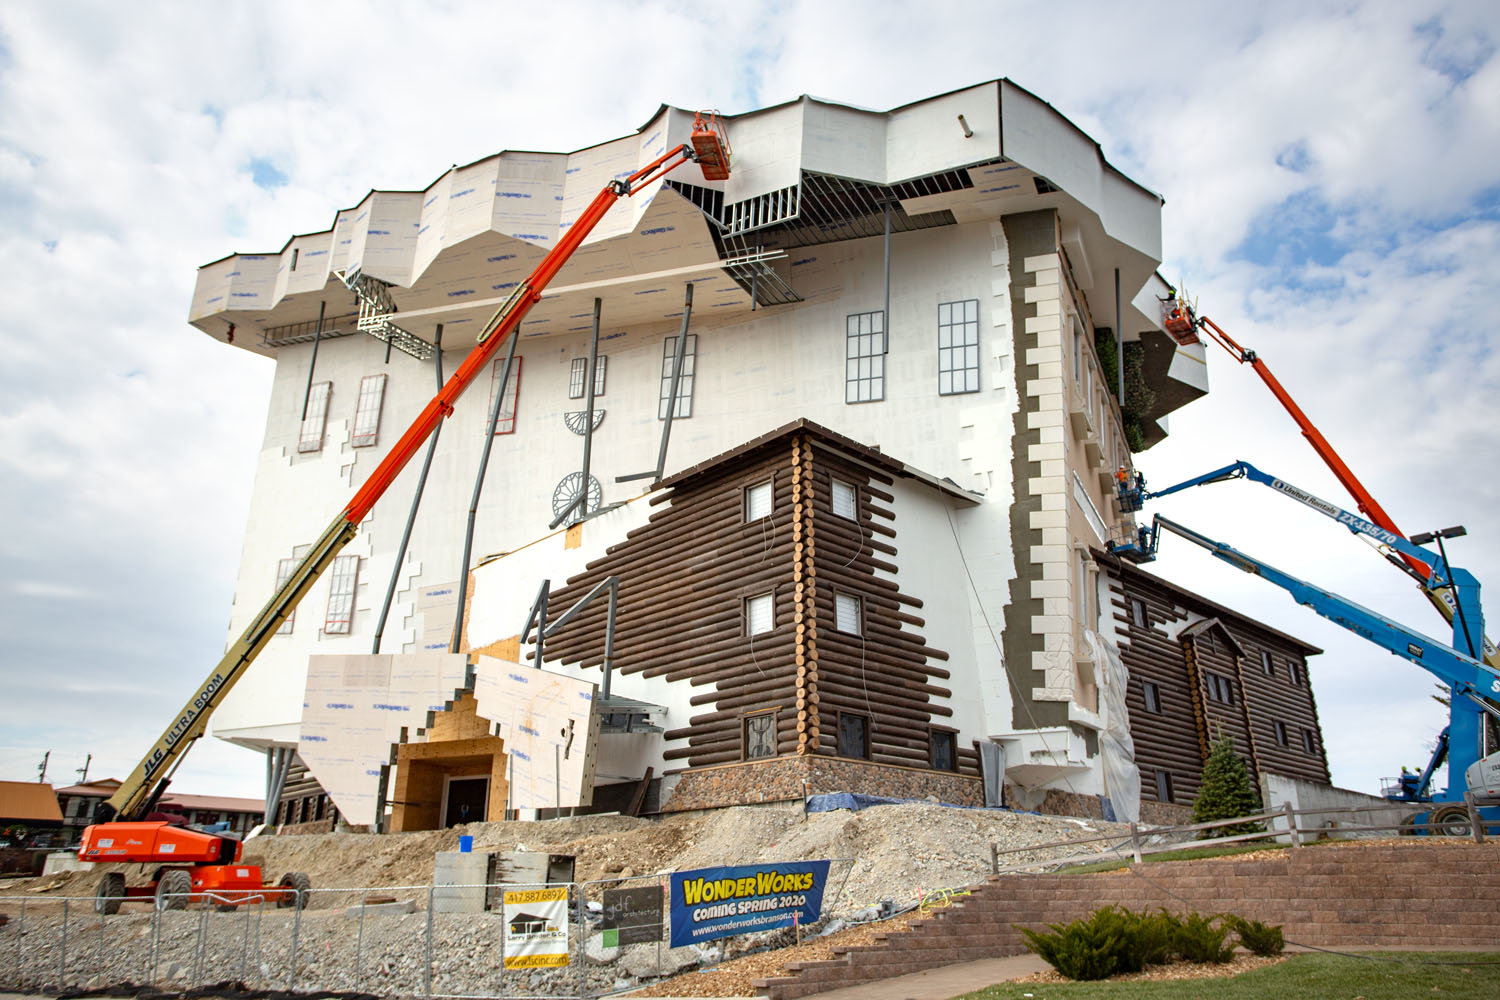 Branson indoor amusement park WonderWorks, a $13 million project shown under construction in November, is set to open in the spring.